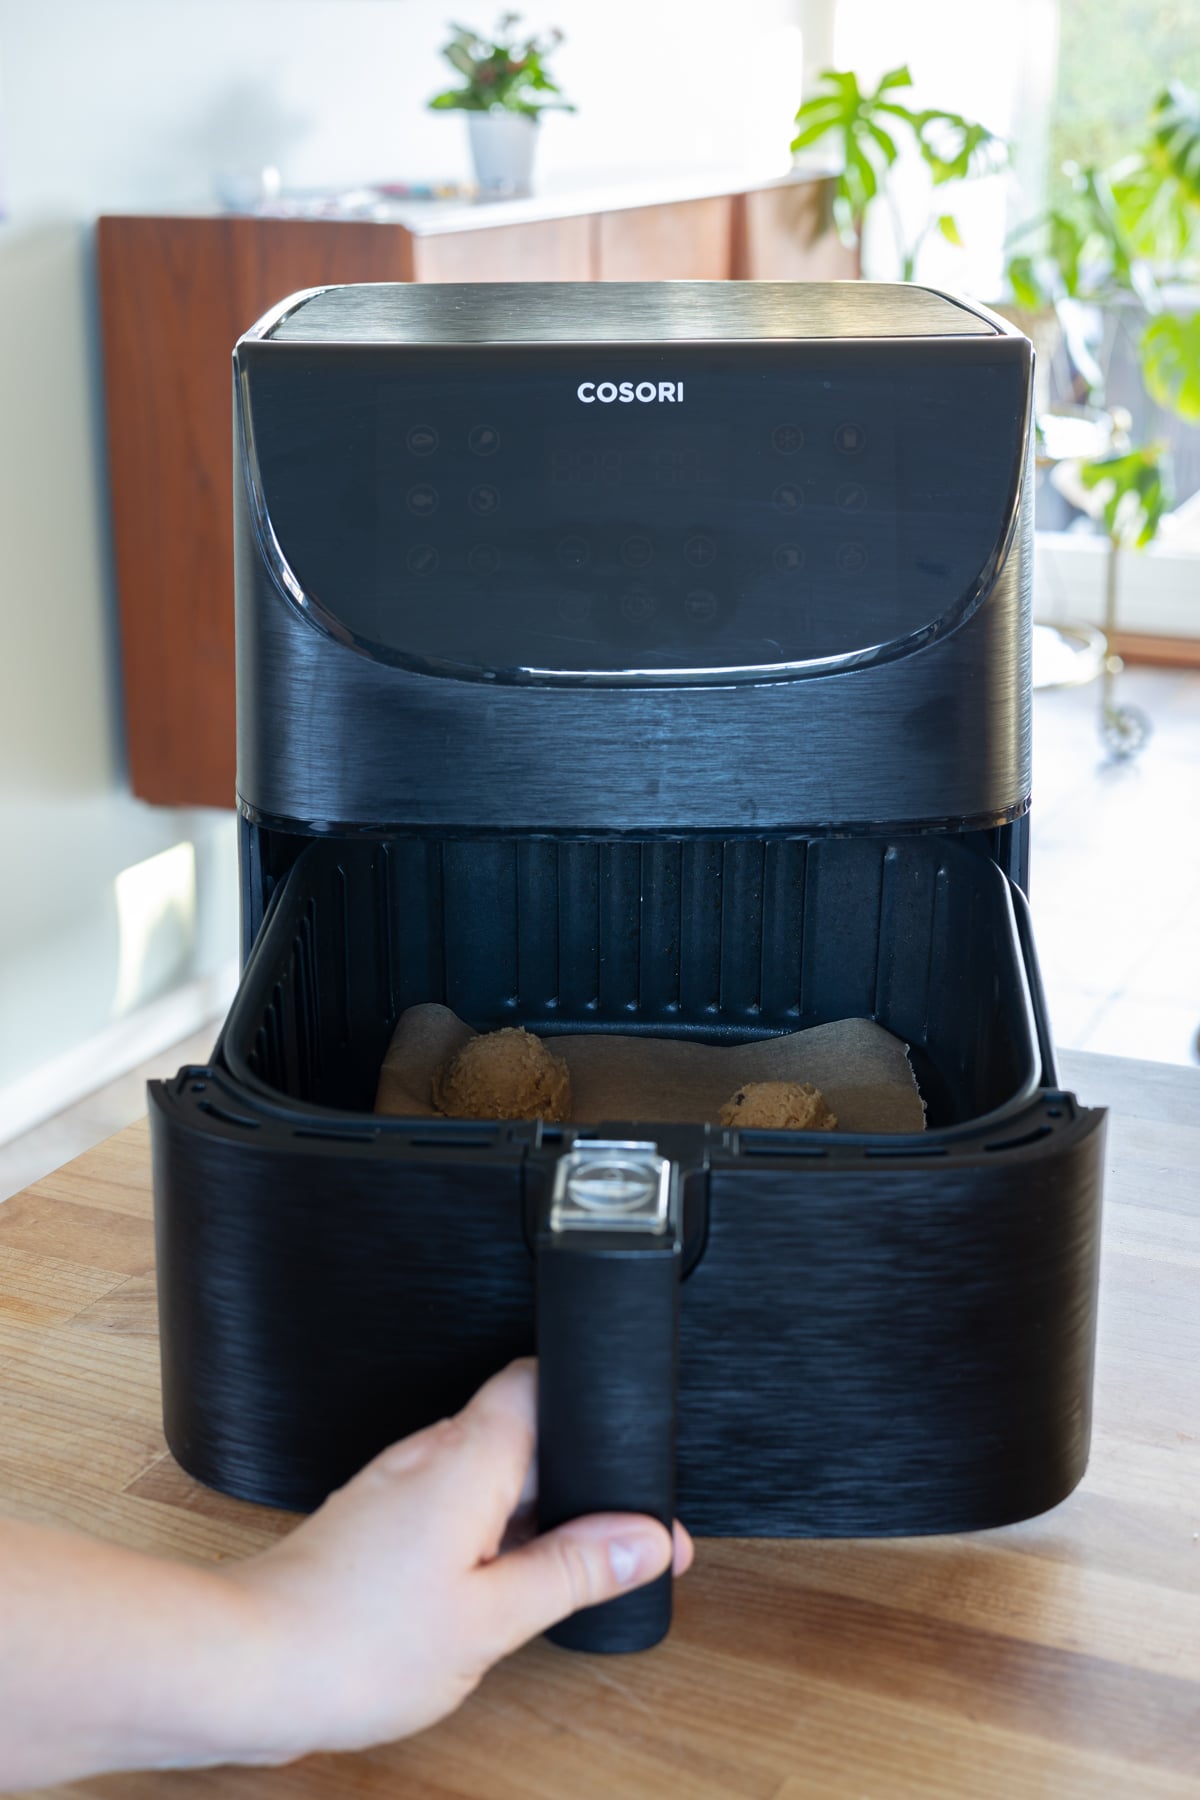 Cookies i airfryer